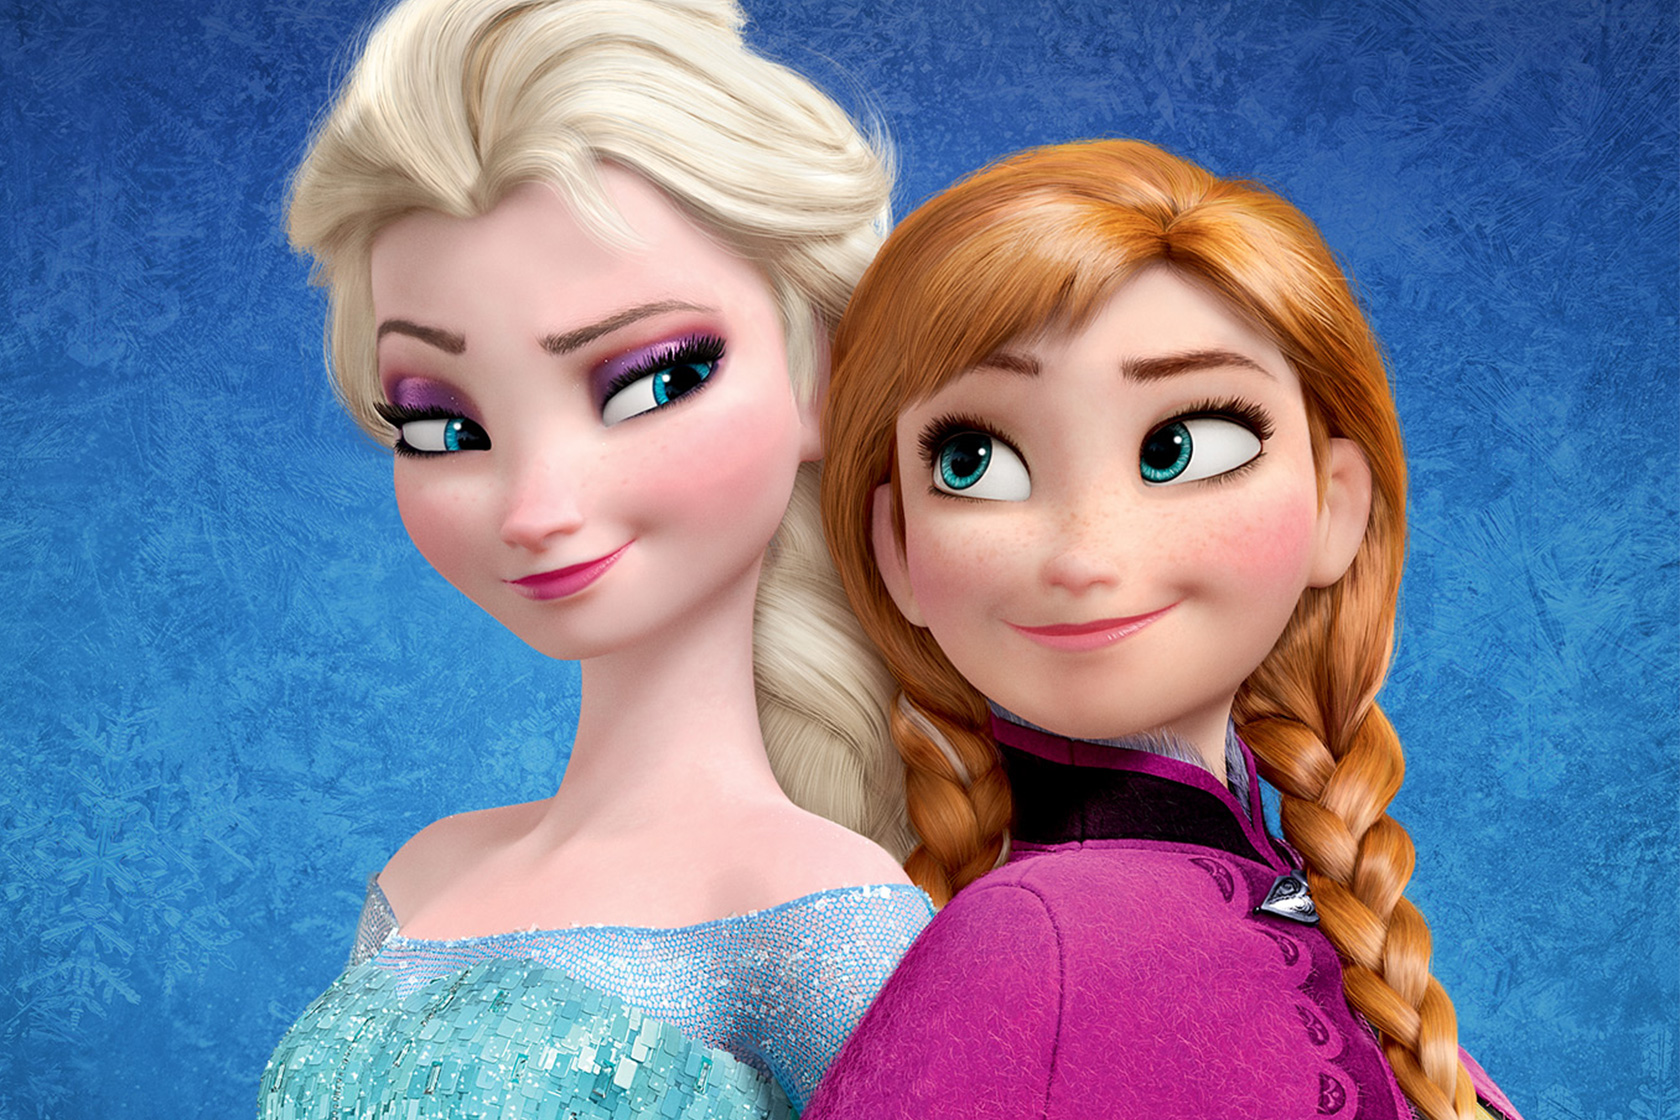 Disney Plus: every single princess ranked by feminist credentials